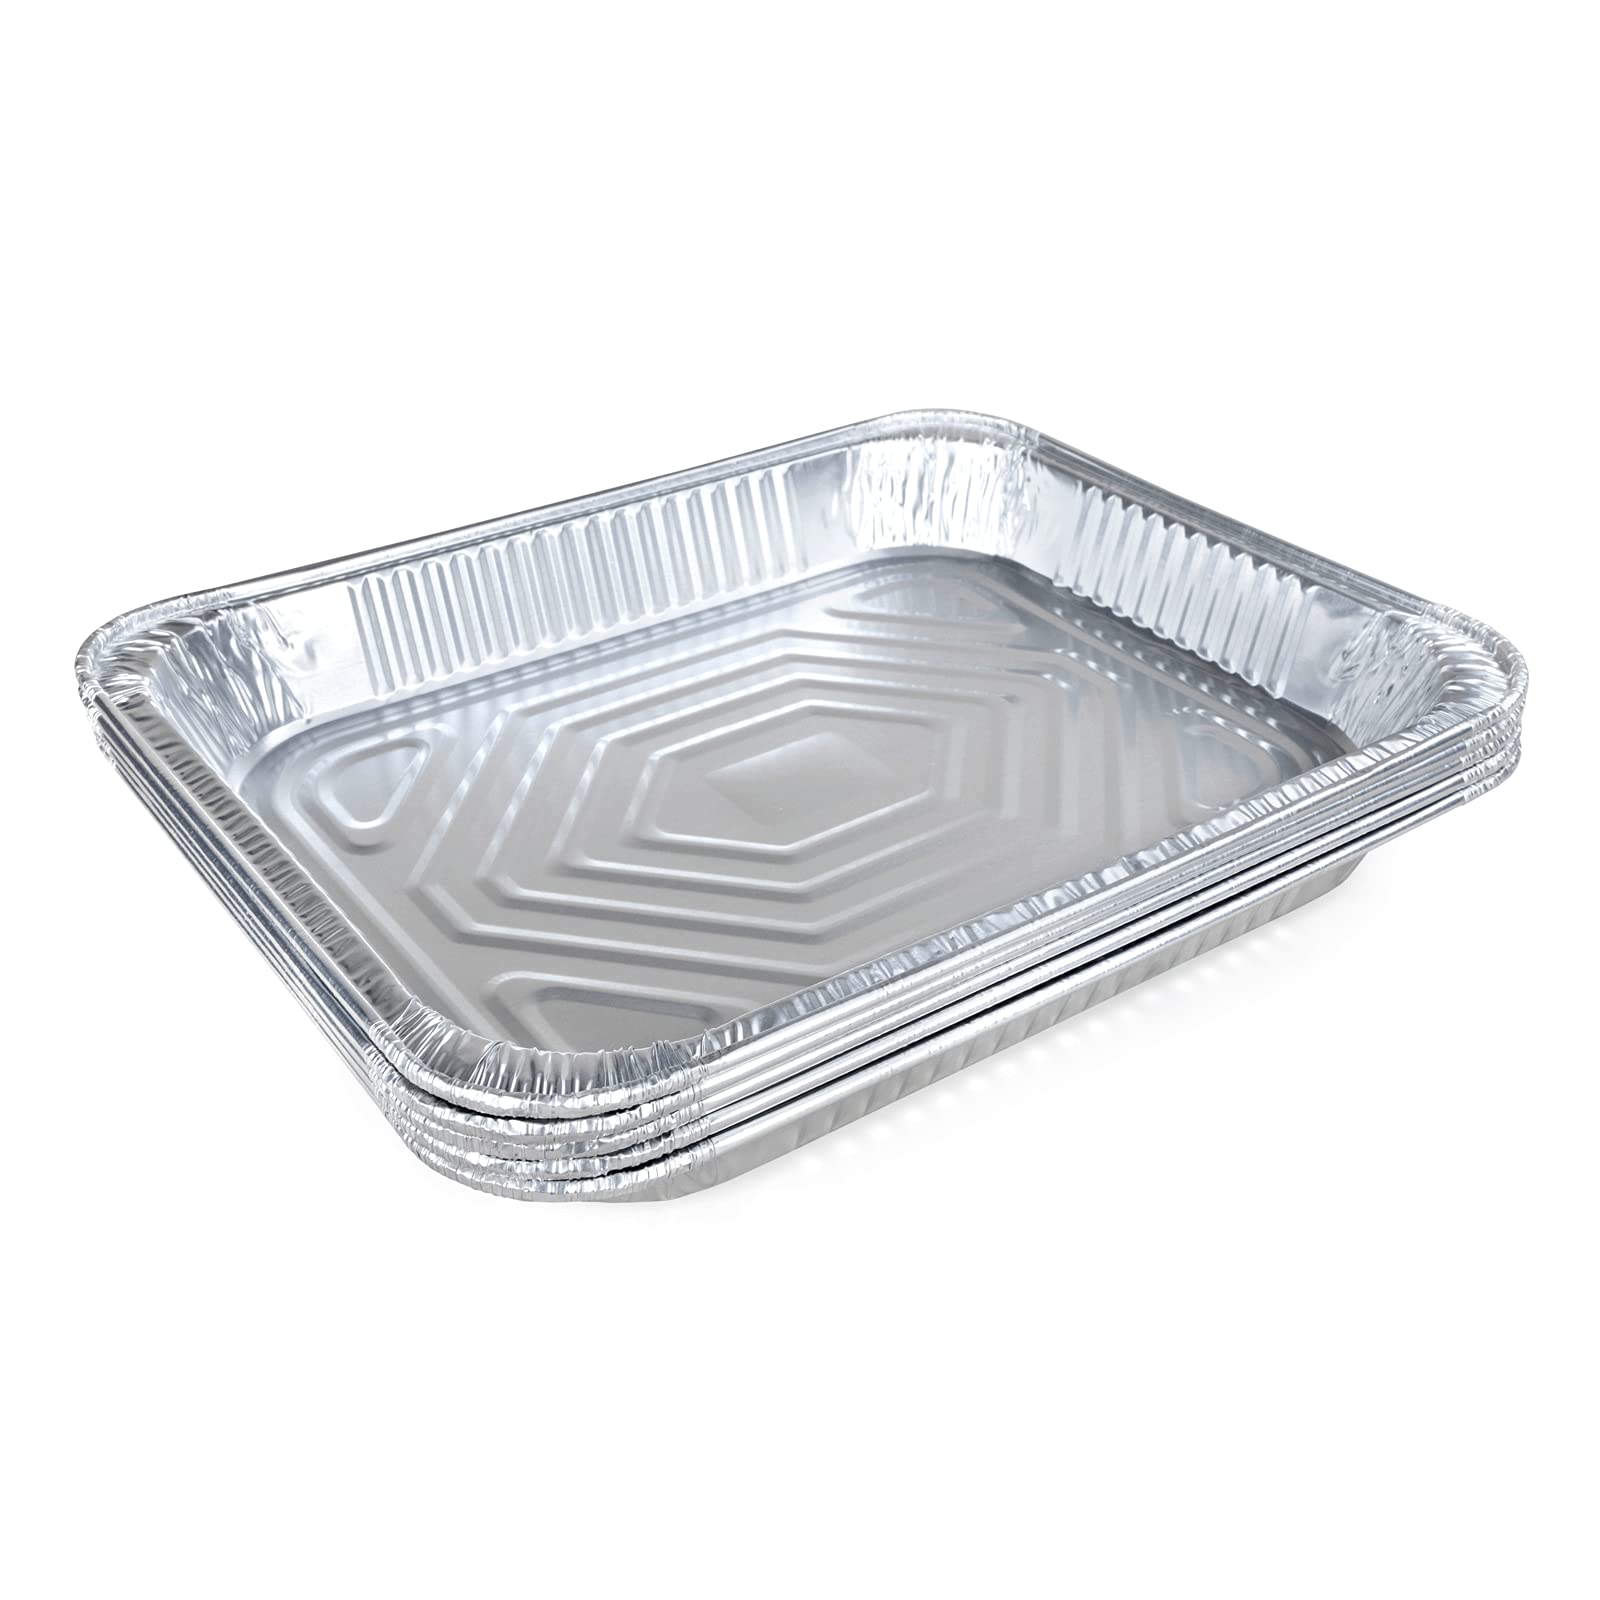 Aluminum Tray - Half Size - Shallow  (Table Pans)